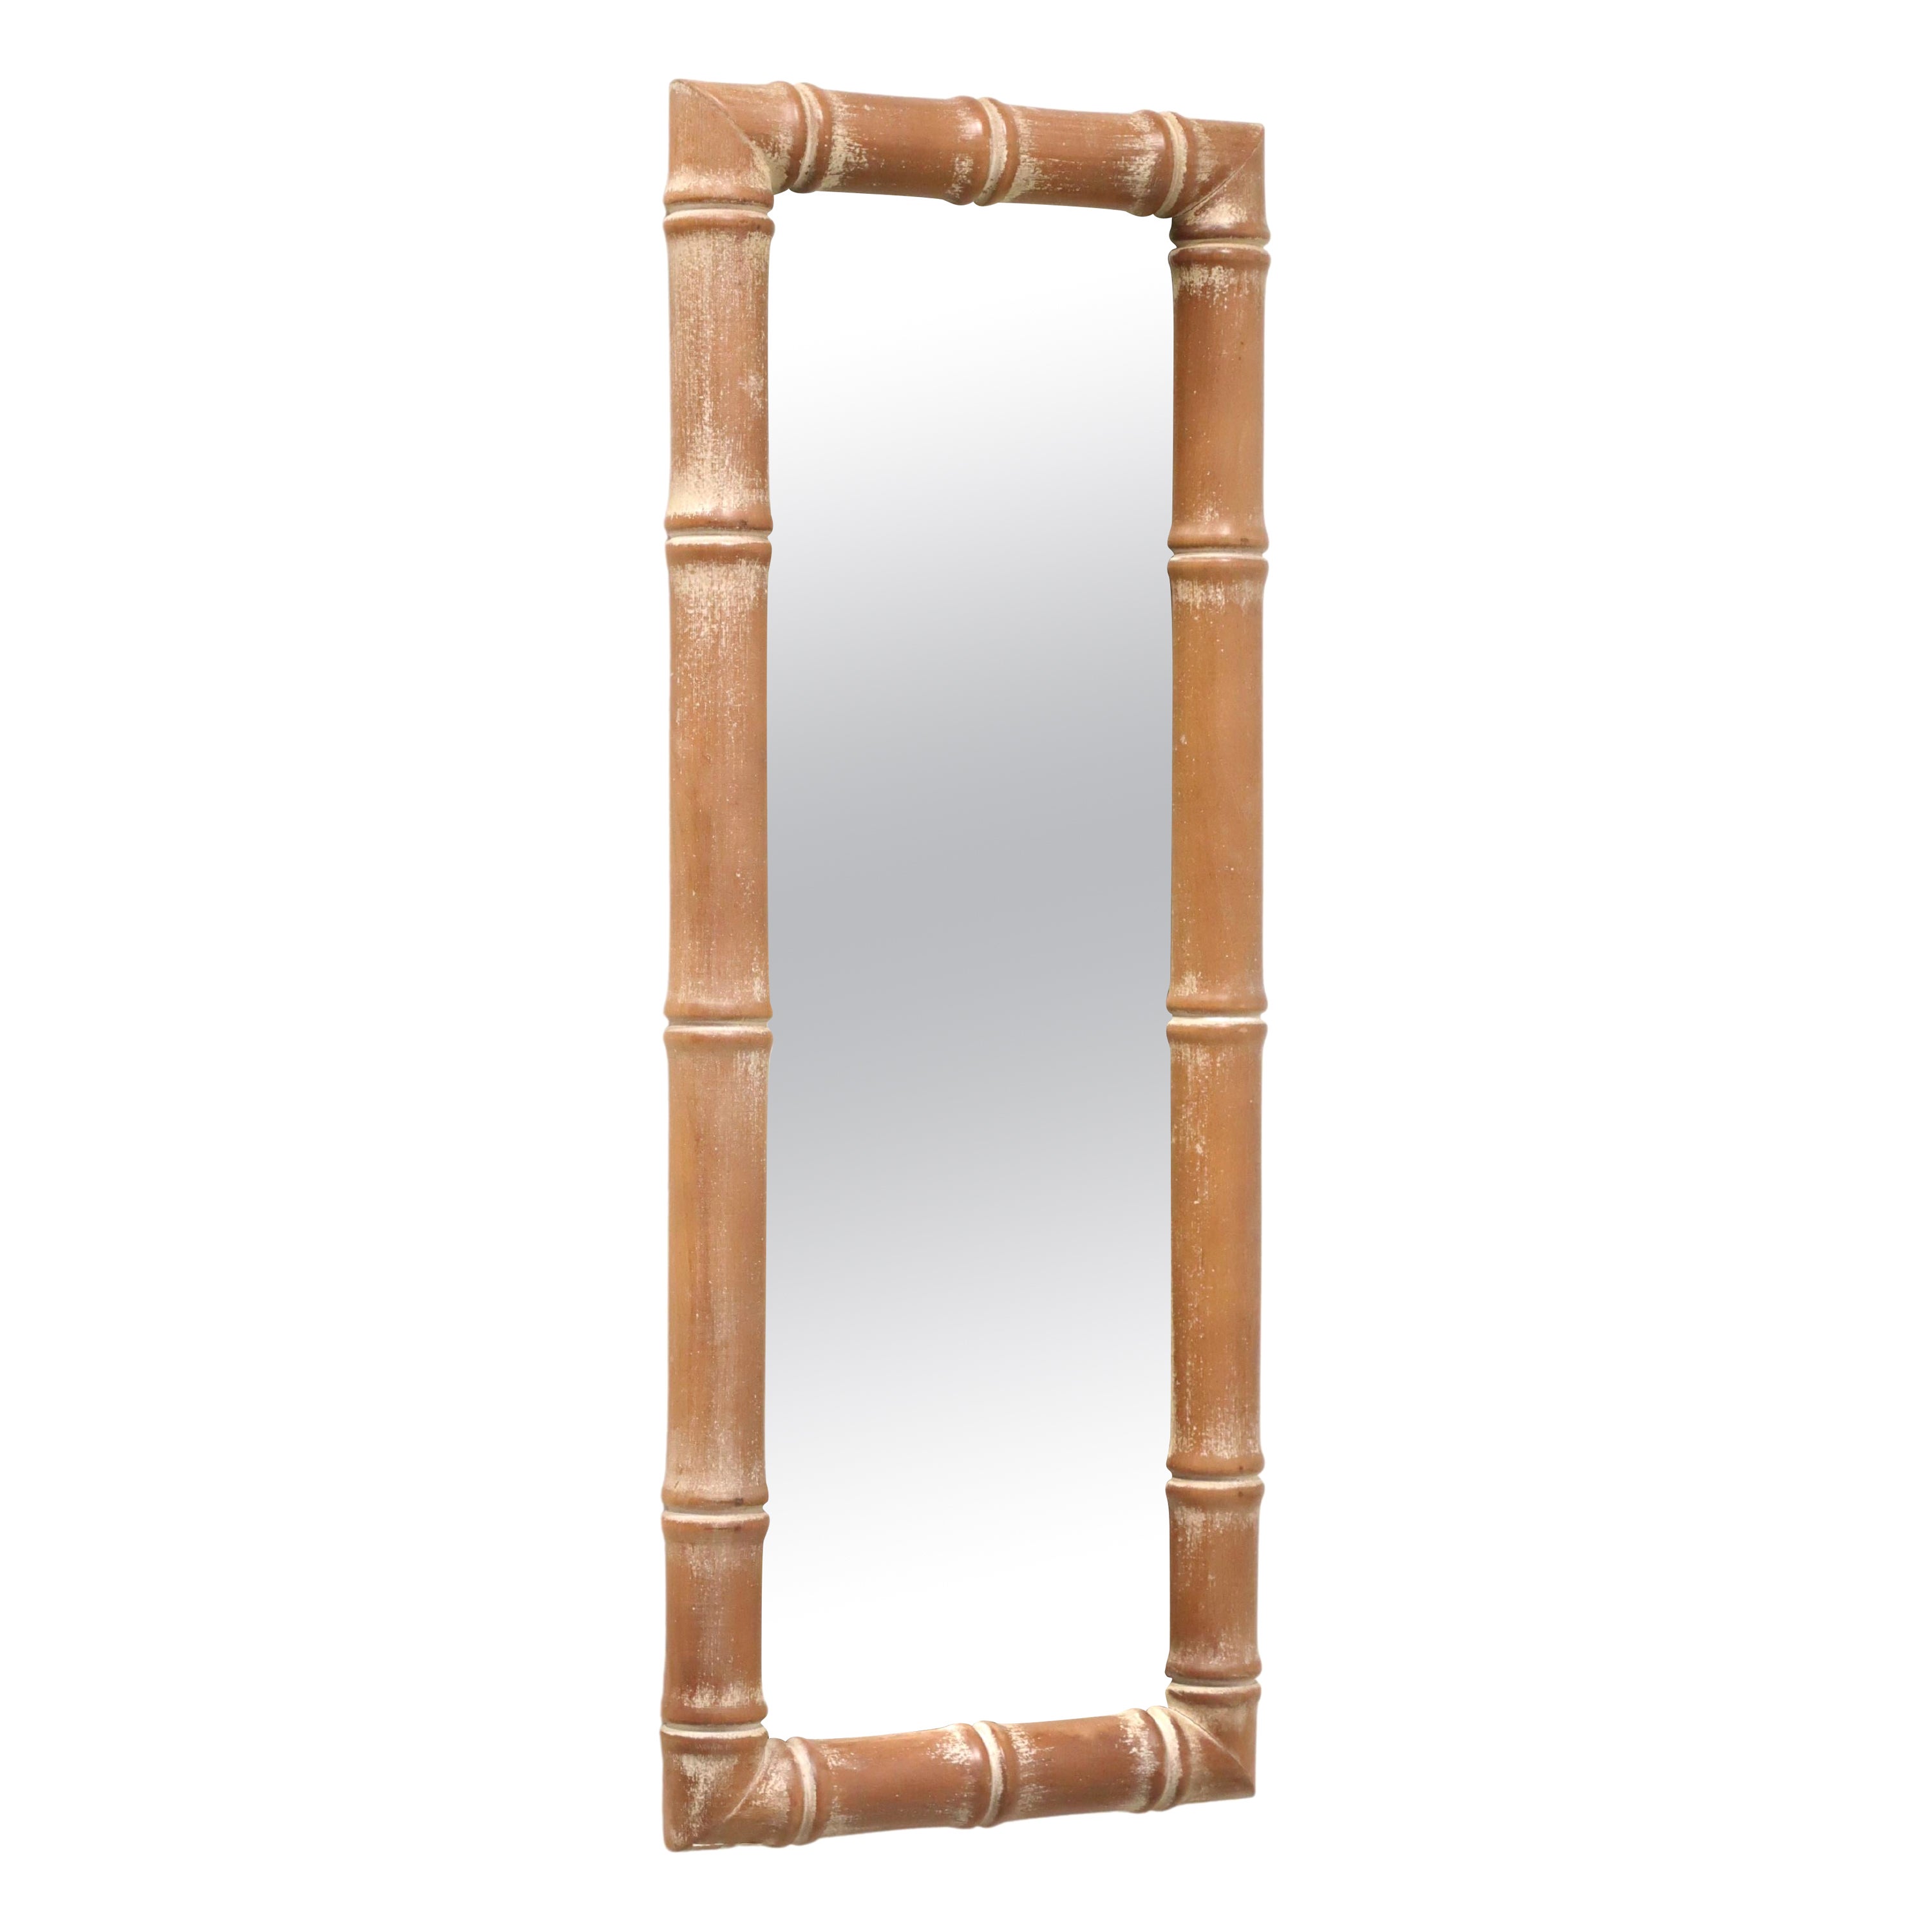 Mid 20th Century Whitewashed Faux Bamboo Asian Rectangular Wall Mirror For Sale